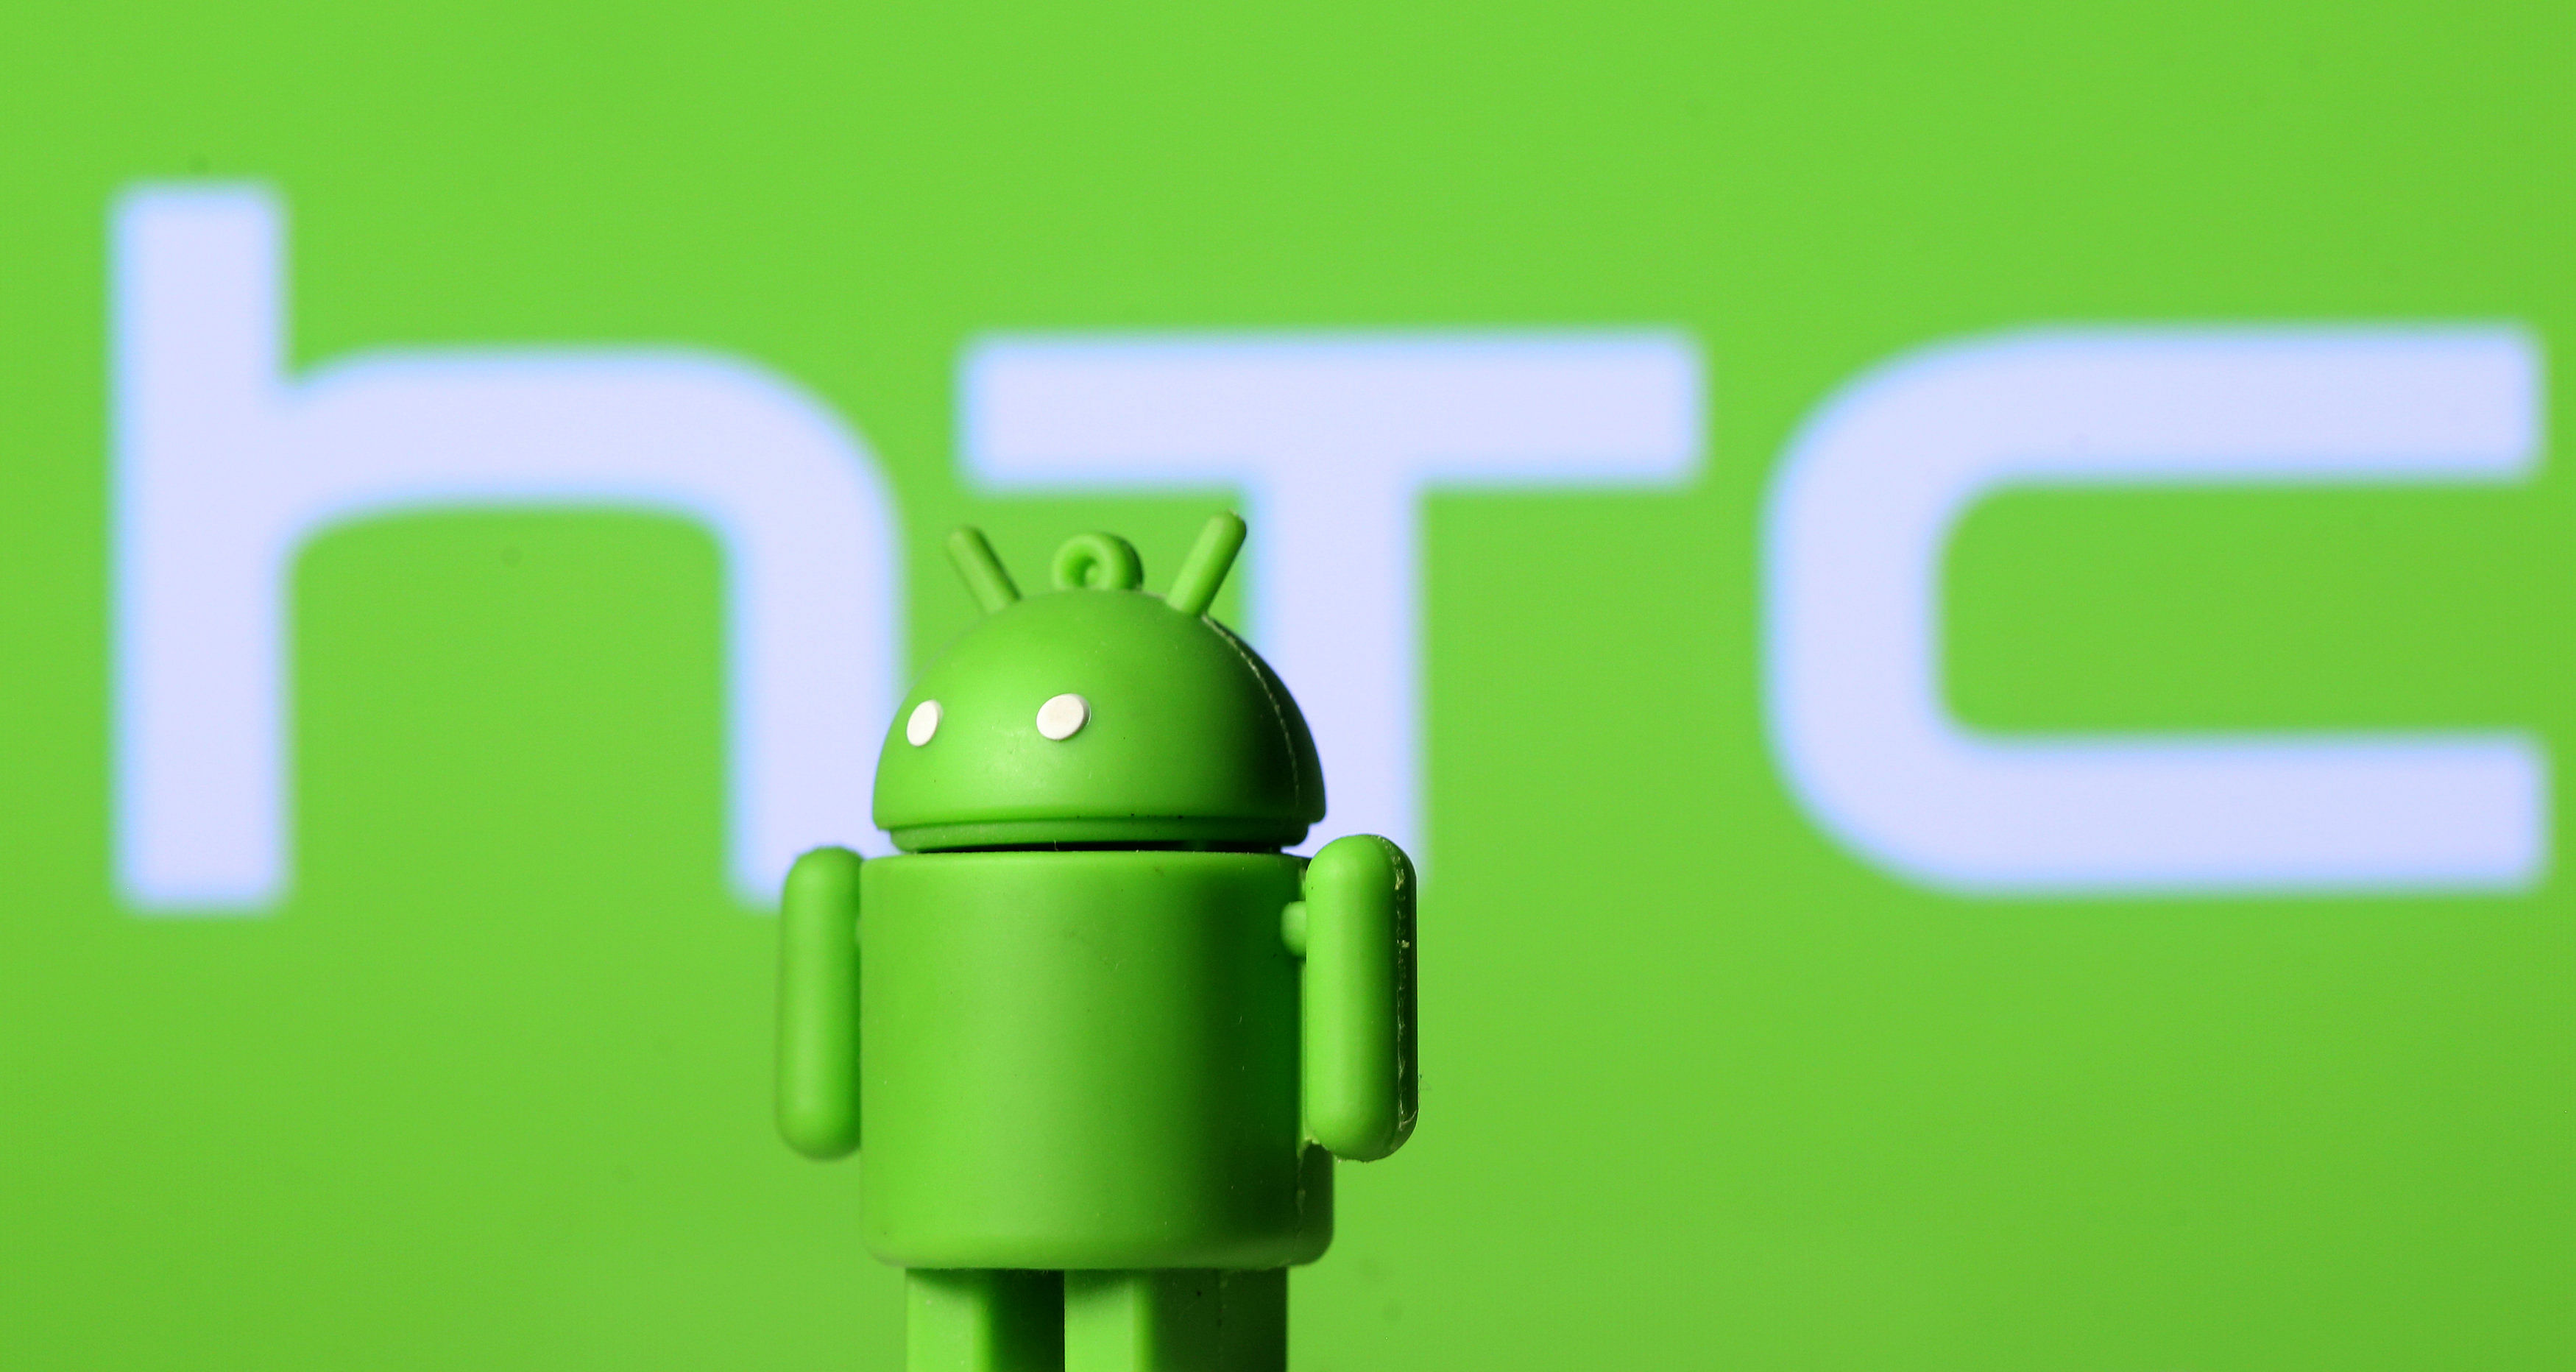 Android toy infront of HTC logo (REUTERS/Dado Ruvic/Illustration)